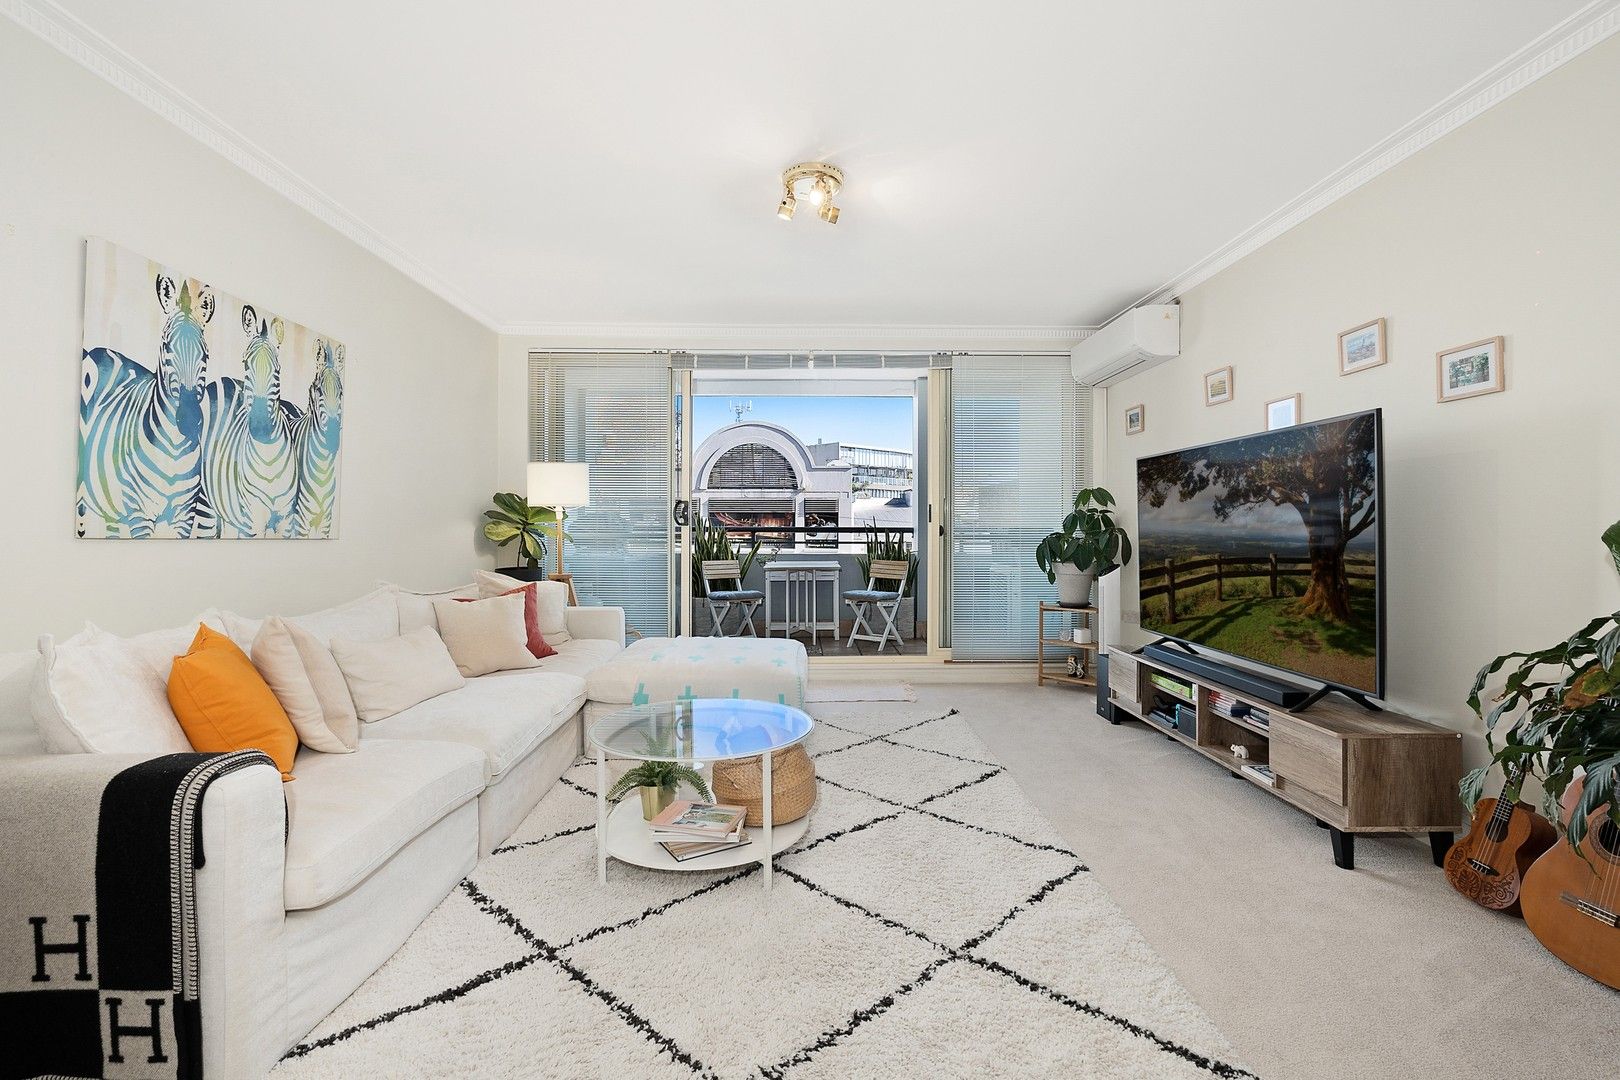 2 bedrooms Apartment / Unit / Flat in 8/9 Alexander Street CROWS NEST NSW, 2065